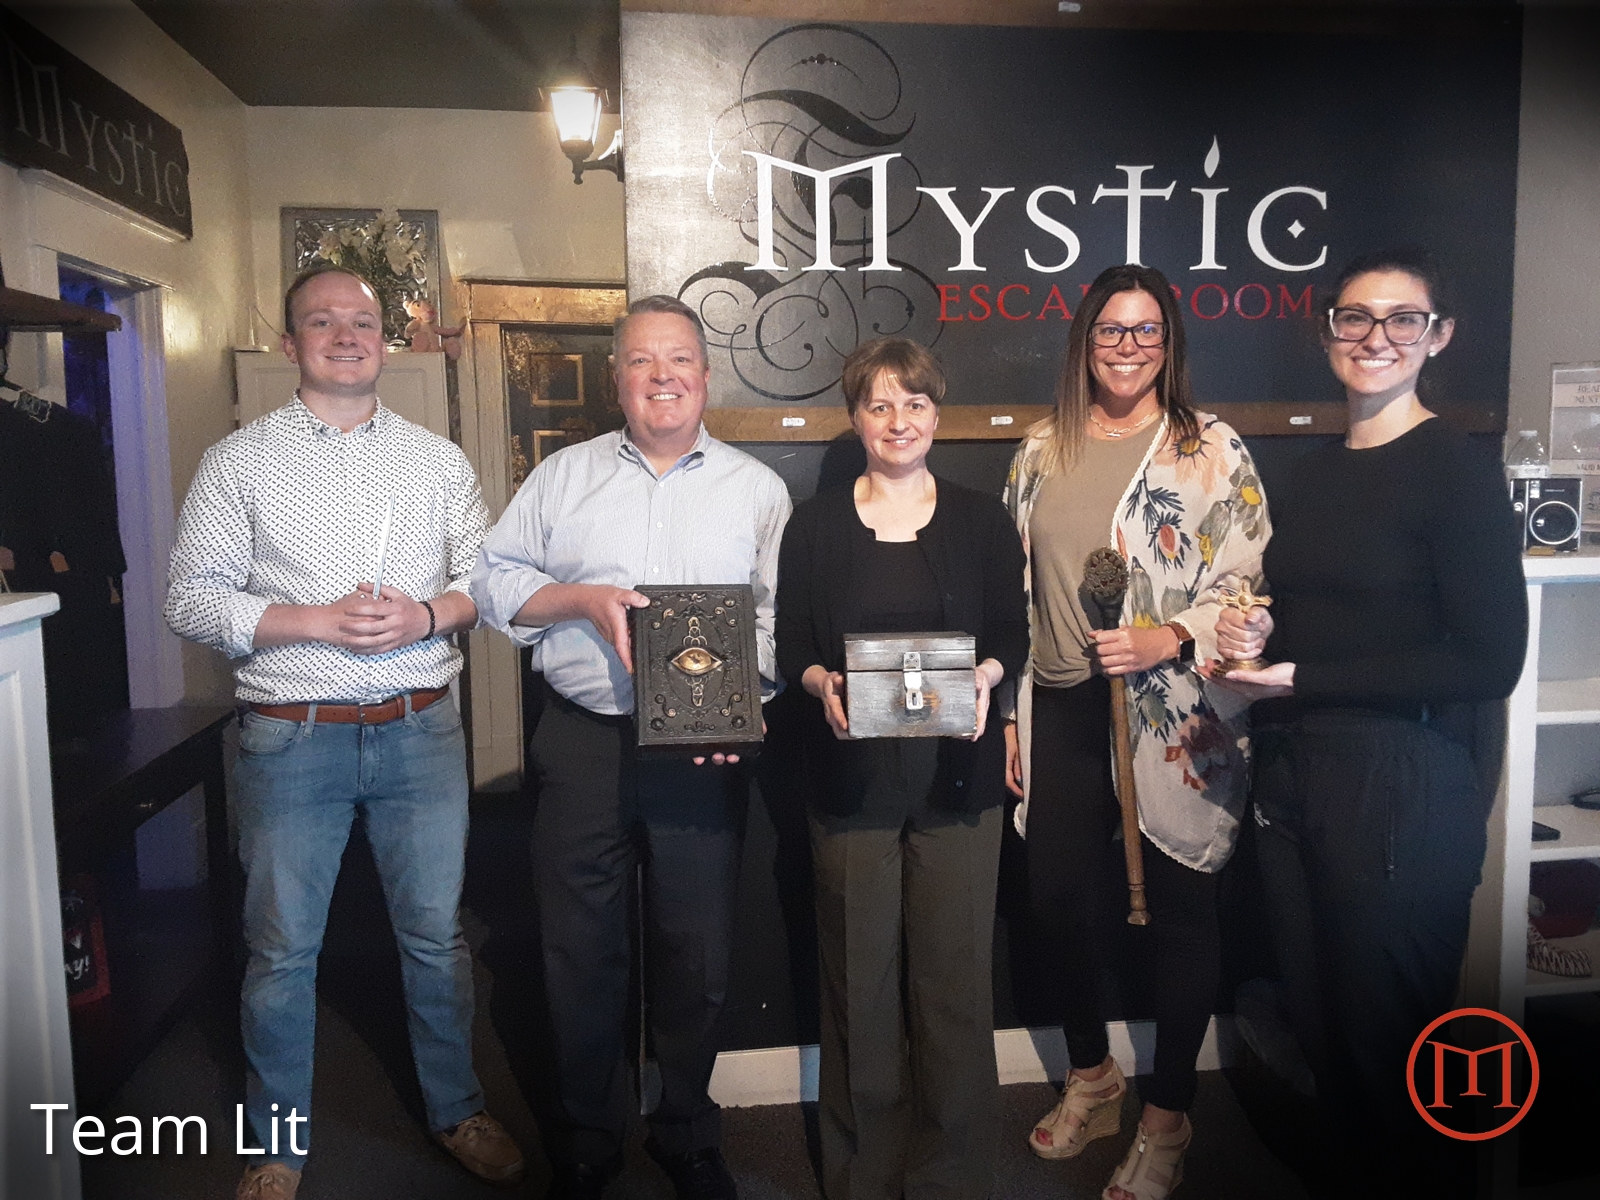 Our Littleton branch had a team building at Mystic Escape Room last week! We had a great time working together to solve the clues and escaped just in time. Thank you, Mystic Escape, for a fun experience!